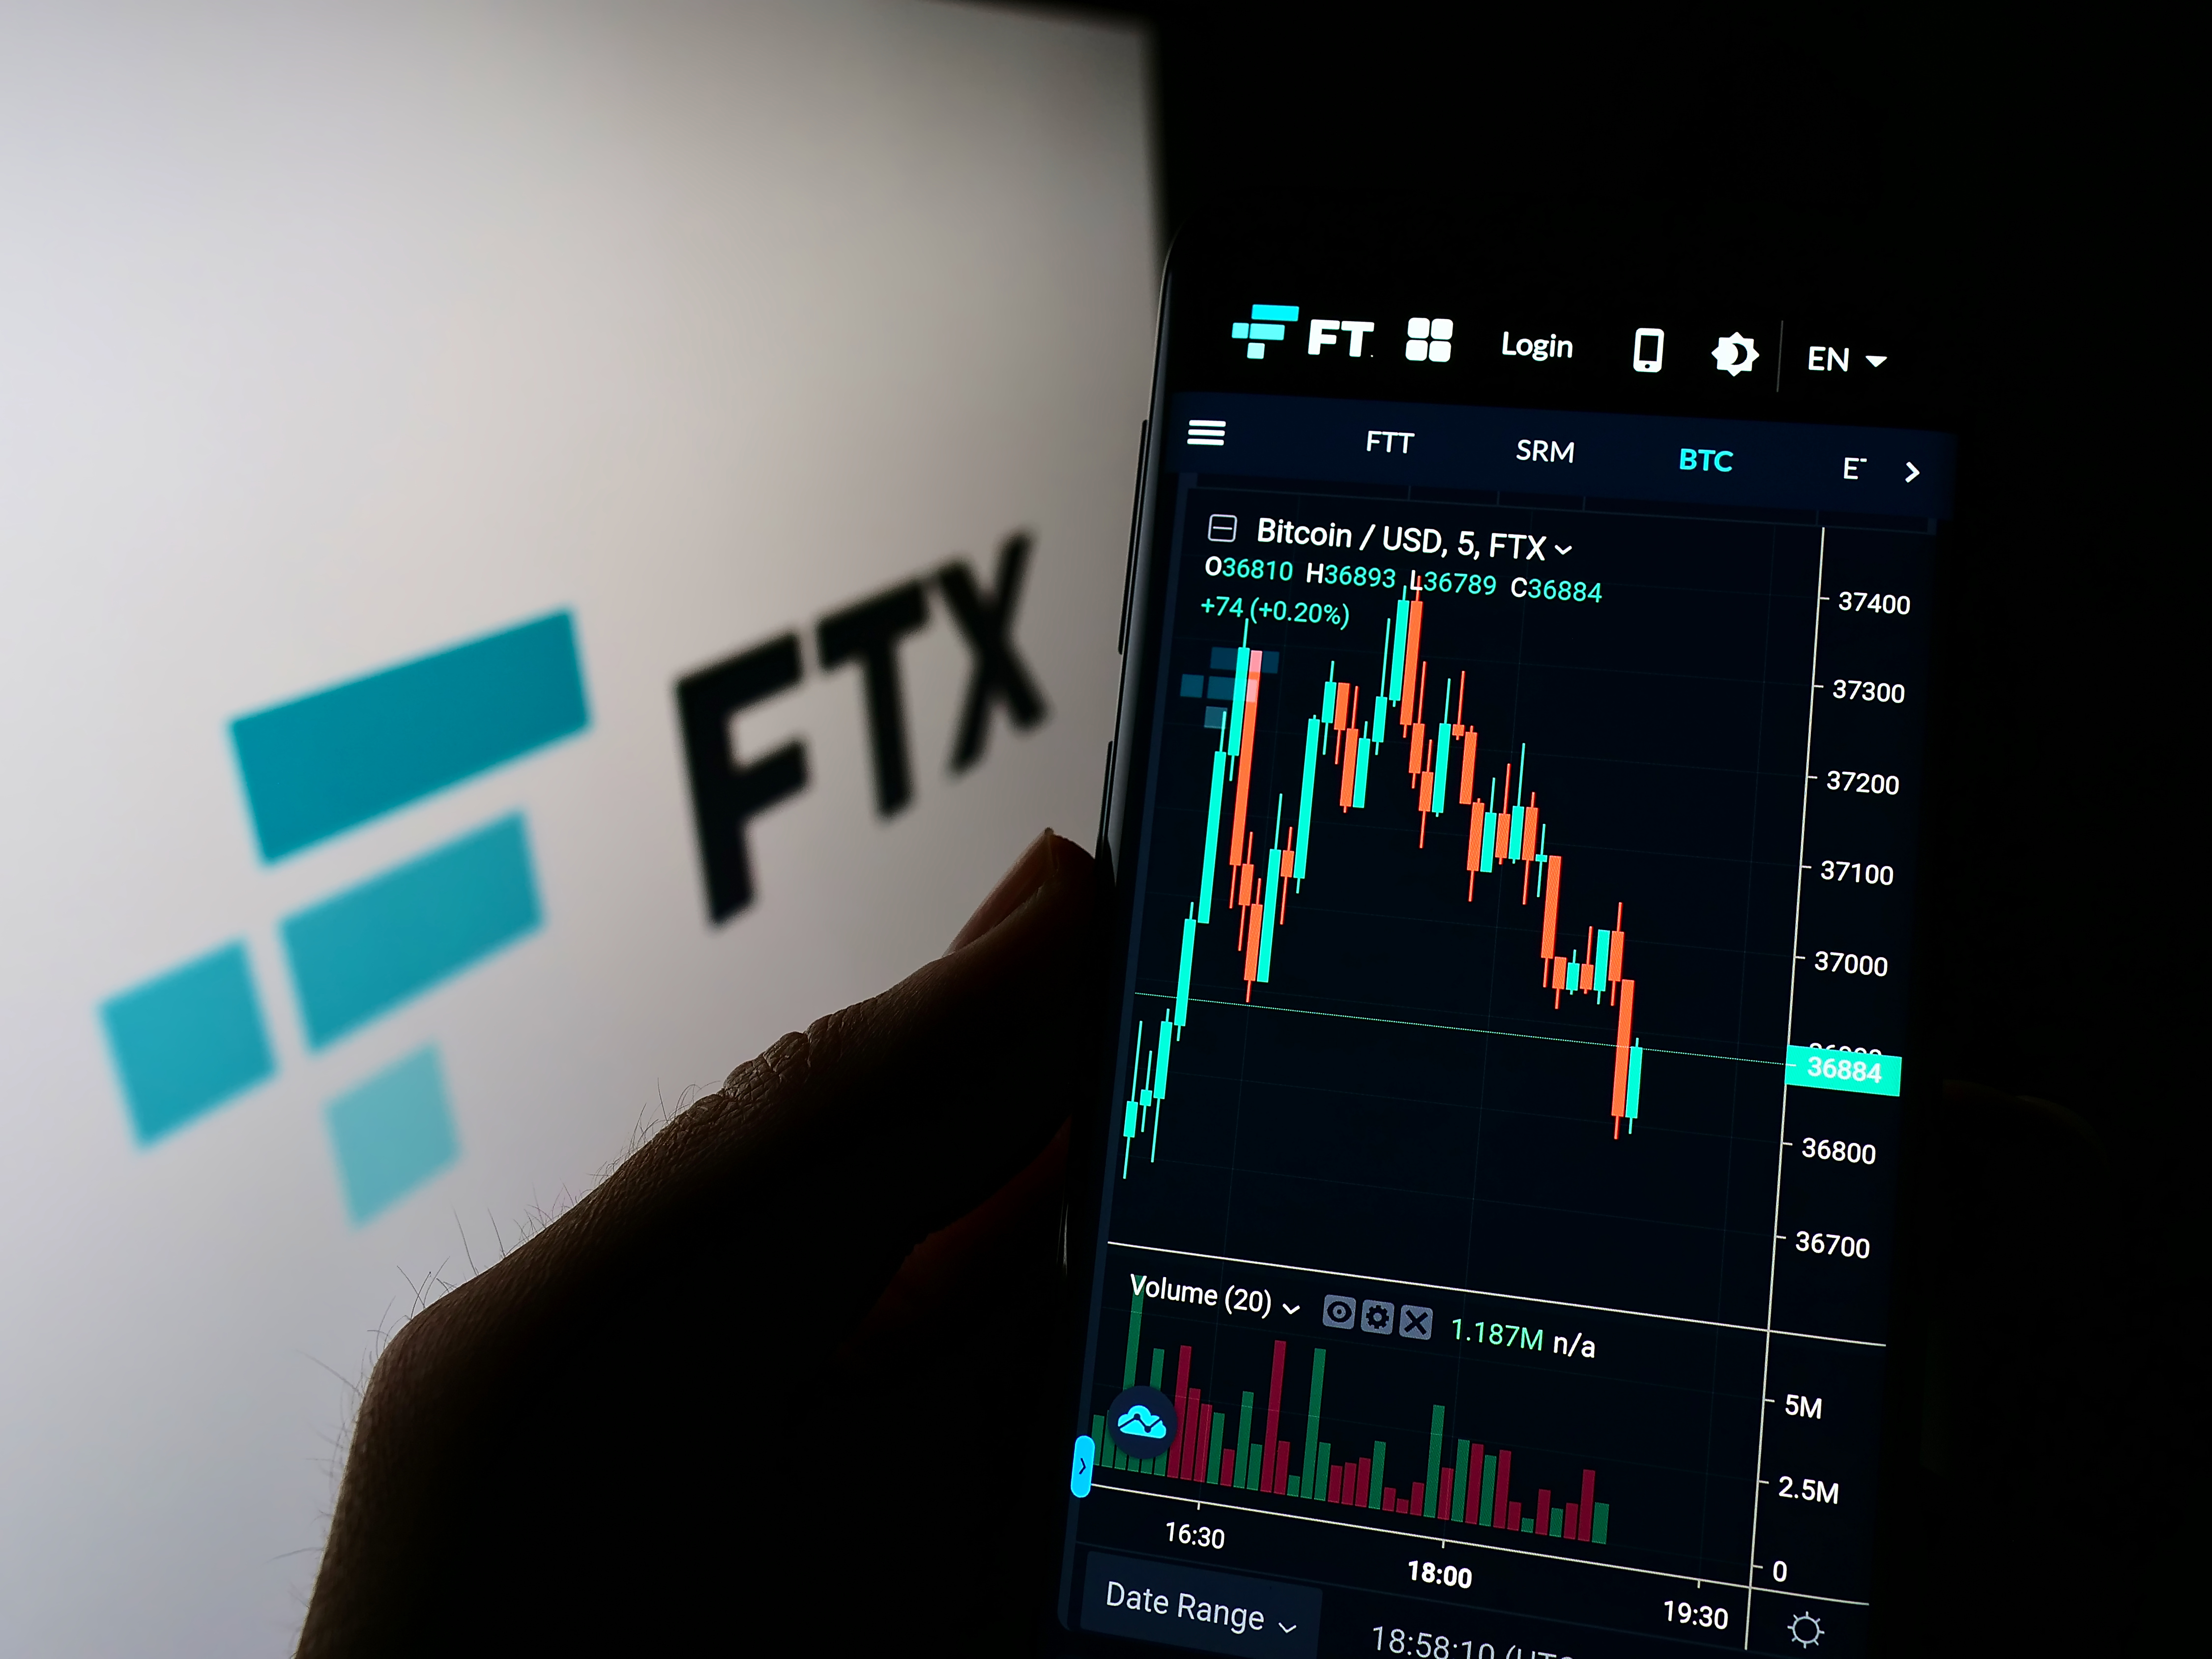 ftx-latest-crypto-prices-stable-as-new-ceo-condemns-complete-failure-here-s-the-shocking-mismanagement-laid-bare